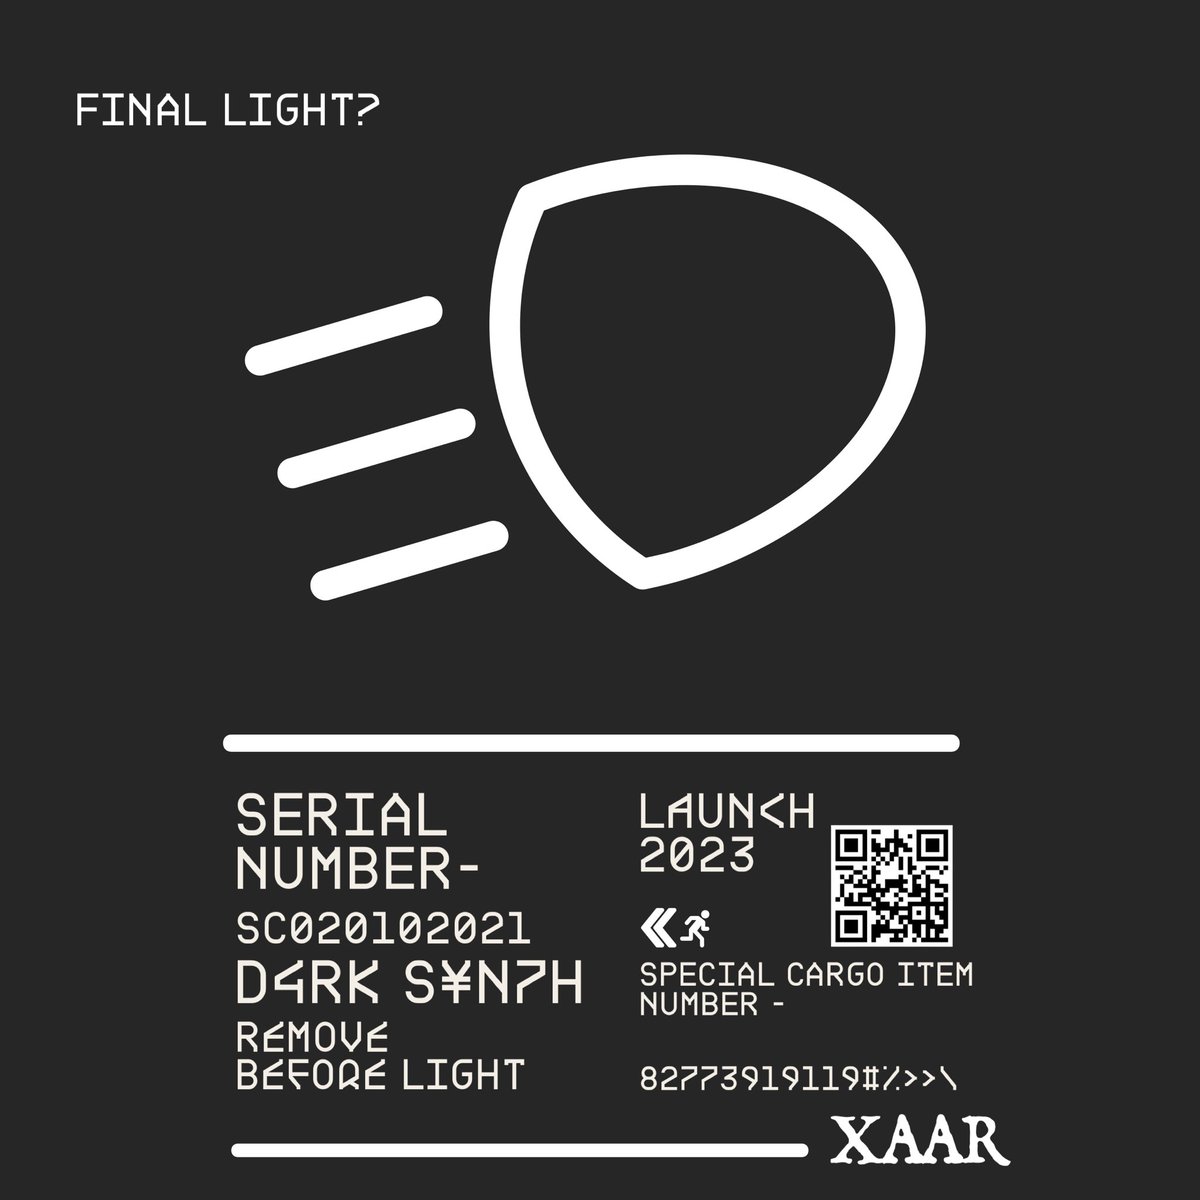 Final Light? Drops 01/03/2023! Scan the QR CODE to pre save! Be sure to FOLLOW XAAR on your streaming platform of choice! #NewMusic #AmazonMusic #postapocalyptic #IndustrialMetal #Darkwave #DarkSynth #GamingPlaylist #MetalPlaylist